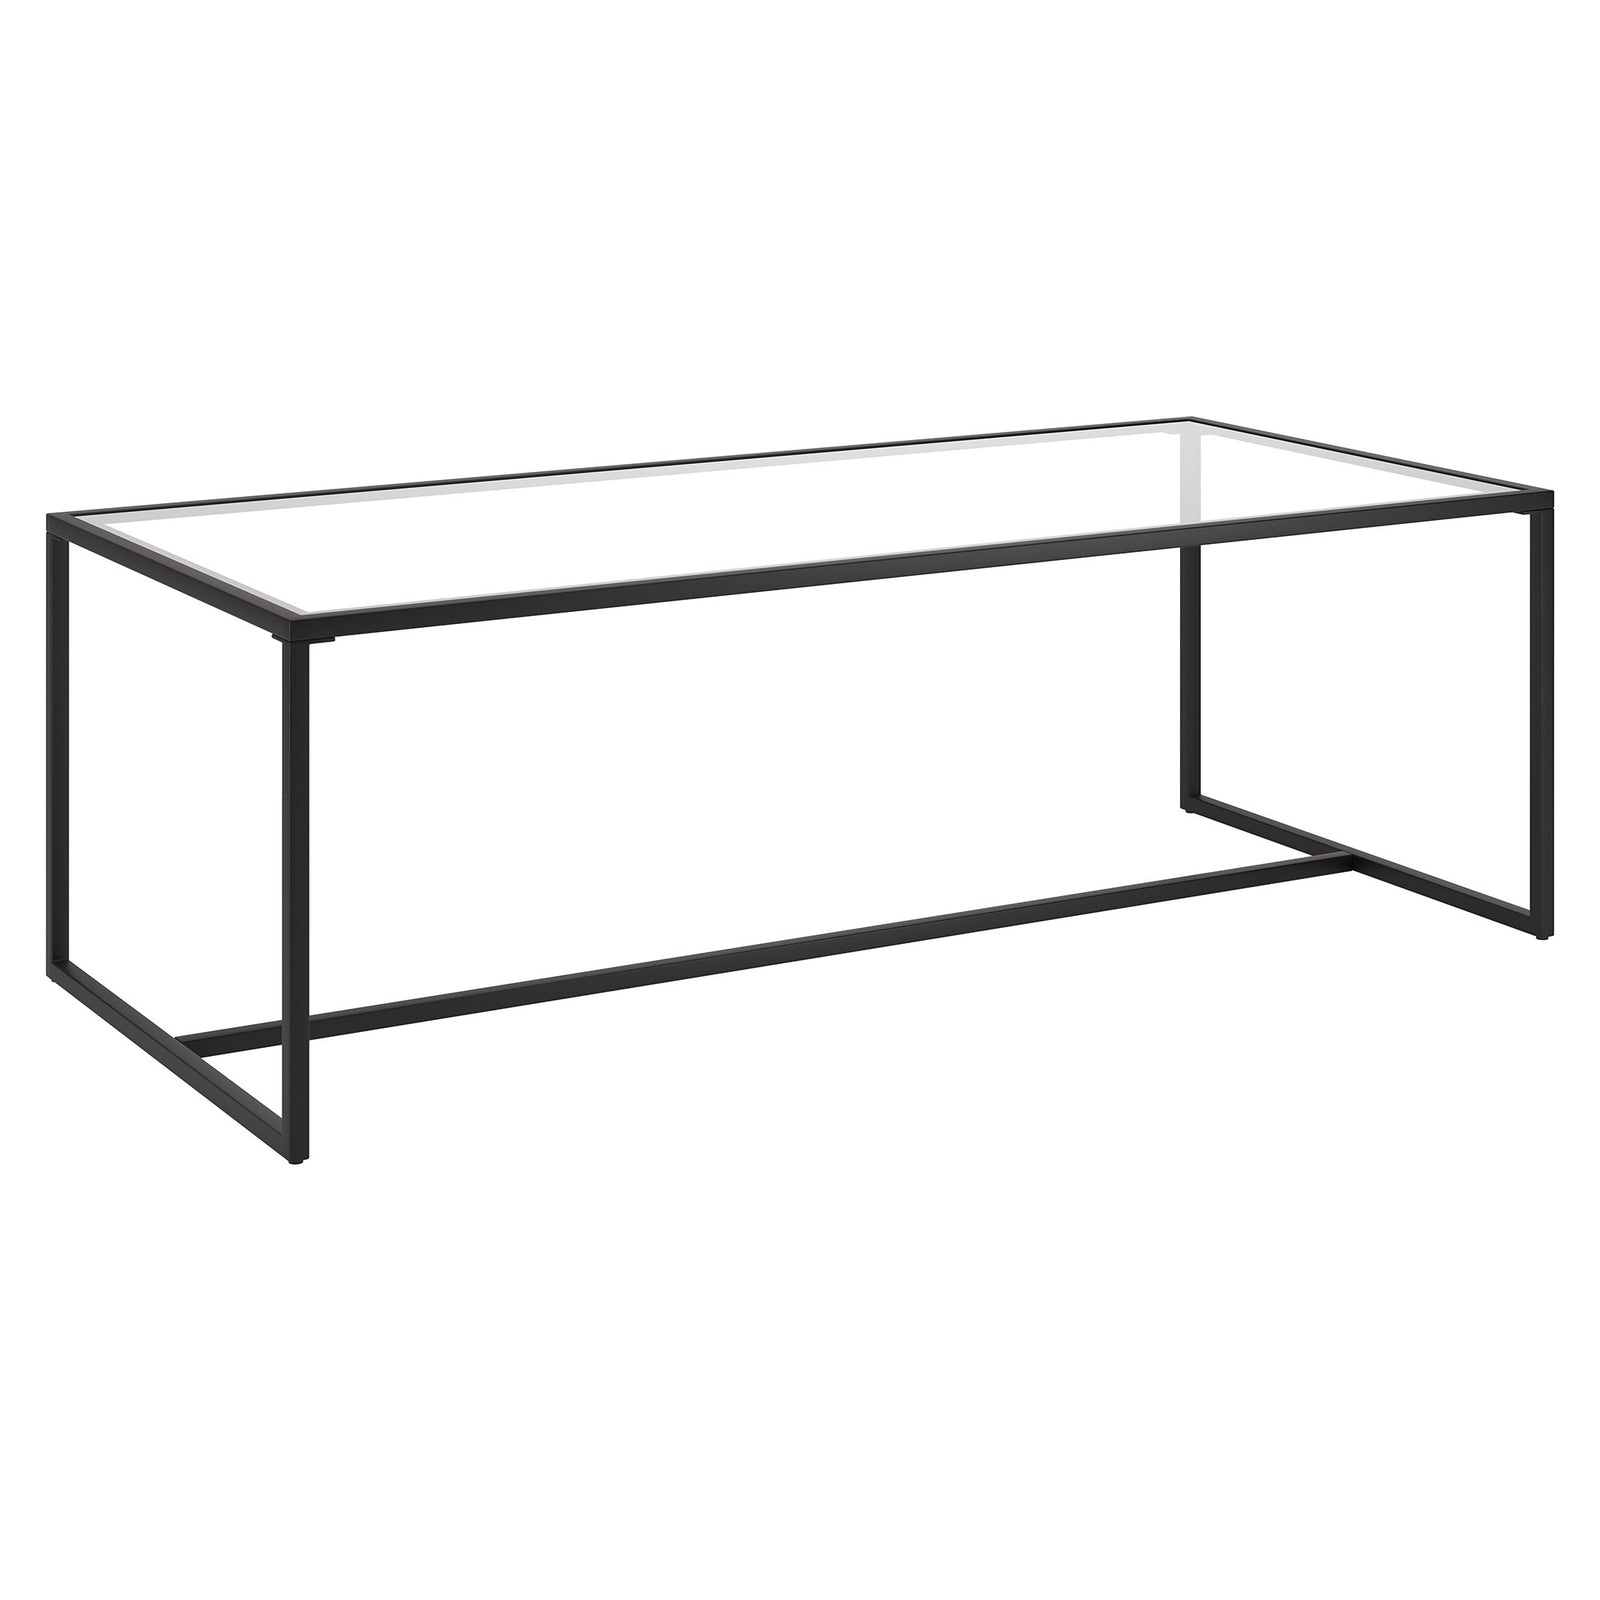 47" Black and Glass Rectangular Sled Base Coffee Table